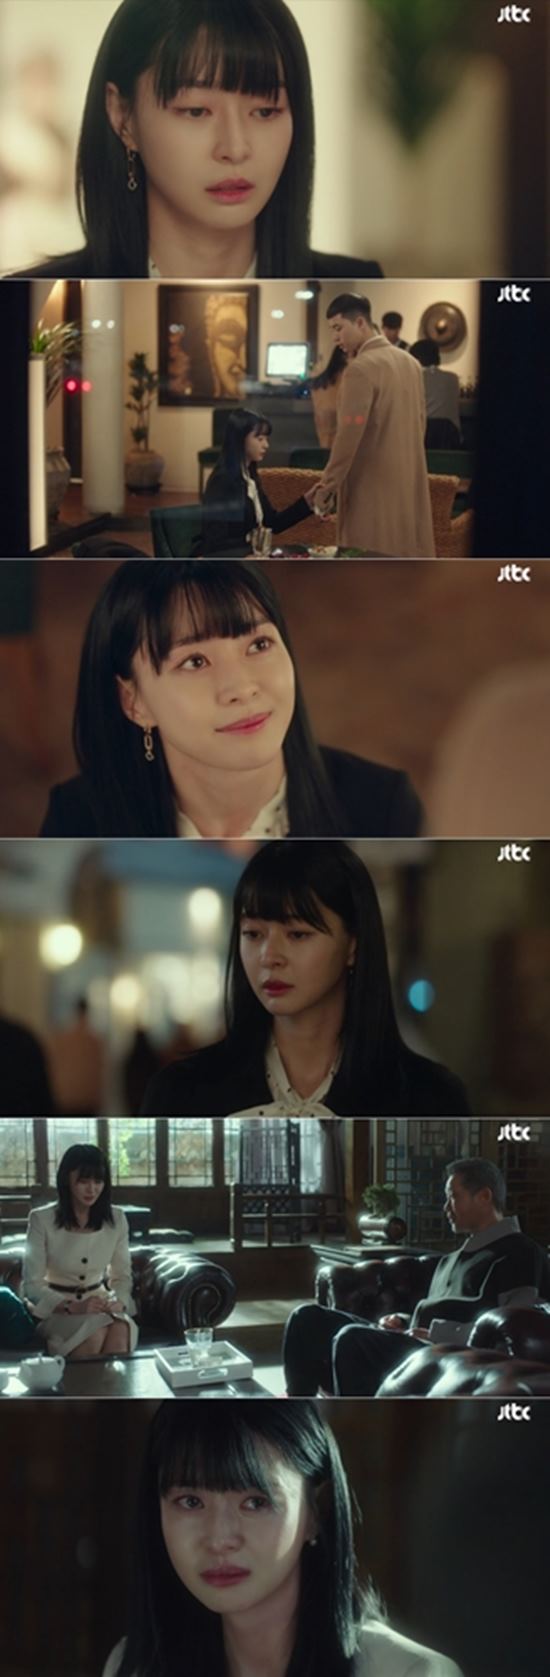 Itaewon Klath Kwon Nara wet the house theater with tears.Kwon Nara played Oh Soo-ah, who noticed the change of Park Seo-joon (Park Seo-joon) in JTBCs Golden Tale Drama Itaewon Klath episode 14, which aired on the 14th.Oh Soo-ah, who met Roy after a long time, smiled, saying, I bought a house. I had a dream since I was a child, he said.But, you know, I feel strange these days, and Im sure its a life I wanted, but its empty, he said, revealing his futility about the life hed run for success.Oh Soo-ah then spoke to Roy, who was as successful as he was, saying, I am making a white water, is it a while?Unlike expectations, Roy did not answer easily, and Oh Soo-ah was anxious and said, Do you still like me? Say you like me?Among them, Joe-yool Lee (Kim Dae-mi) witnessed the two, and Roy tried to follow her, and Oh Soo-ah caught her by saying, Dont go.Do you like Seo-yool Lee? Its fifteen years. You have to make me white, you have to like me, he said pathetically, but then he said, Im sorry.Ill call you later, if you send me that tomorrow.Kwon Nara perfectly expressed Oh Soo-ahs psychology of intuitively noticing the change in Parks mind and checking his mind.Especially when I caught the boy, I was joking because I was afraid that he would admit his heart to Joe-yool Lee.Oh Soo-ah was then shocked to learn of the deadline for Chairman Jang Dae-hee (Yoo Jae-myung).Oh Soo-ah, who visited Chang on the way, replied to Chang, Yes, I was afraid of me because of Park, saying, Yes, I was afraid.Oh Soo-ah, who was crying in tears without sound.She was confused by Changs words that she despised such people by stimulating and taming peoples slavery, saying, Why are you telling me this?Kwon Nara expressed the inside of Oh Soo-ah with a wound to her mother who had abandoned without saying that she was returning in the past.Even the heinous chairman of the president was saddened by her struggle not to forsake her relationship with those who wanted her.Above all, the scene of tears rather than anger at the words of Chairman Chang, who despised himself and others like slaves, attracted attention because she was desperately hiding her heart in front of Chairman Chang.Kwon Nara is well received for his detailed performance that does not miss it.Meanwhile, Itaewon Klath, starring Kwon Nara, will be broadcast every Friday and Saturday at 10:50 pm JTBC.Photo = JTBC Broadcasting Screen